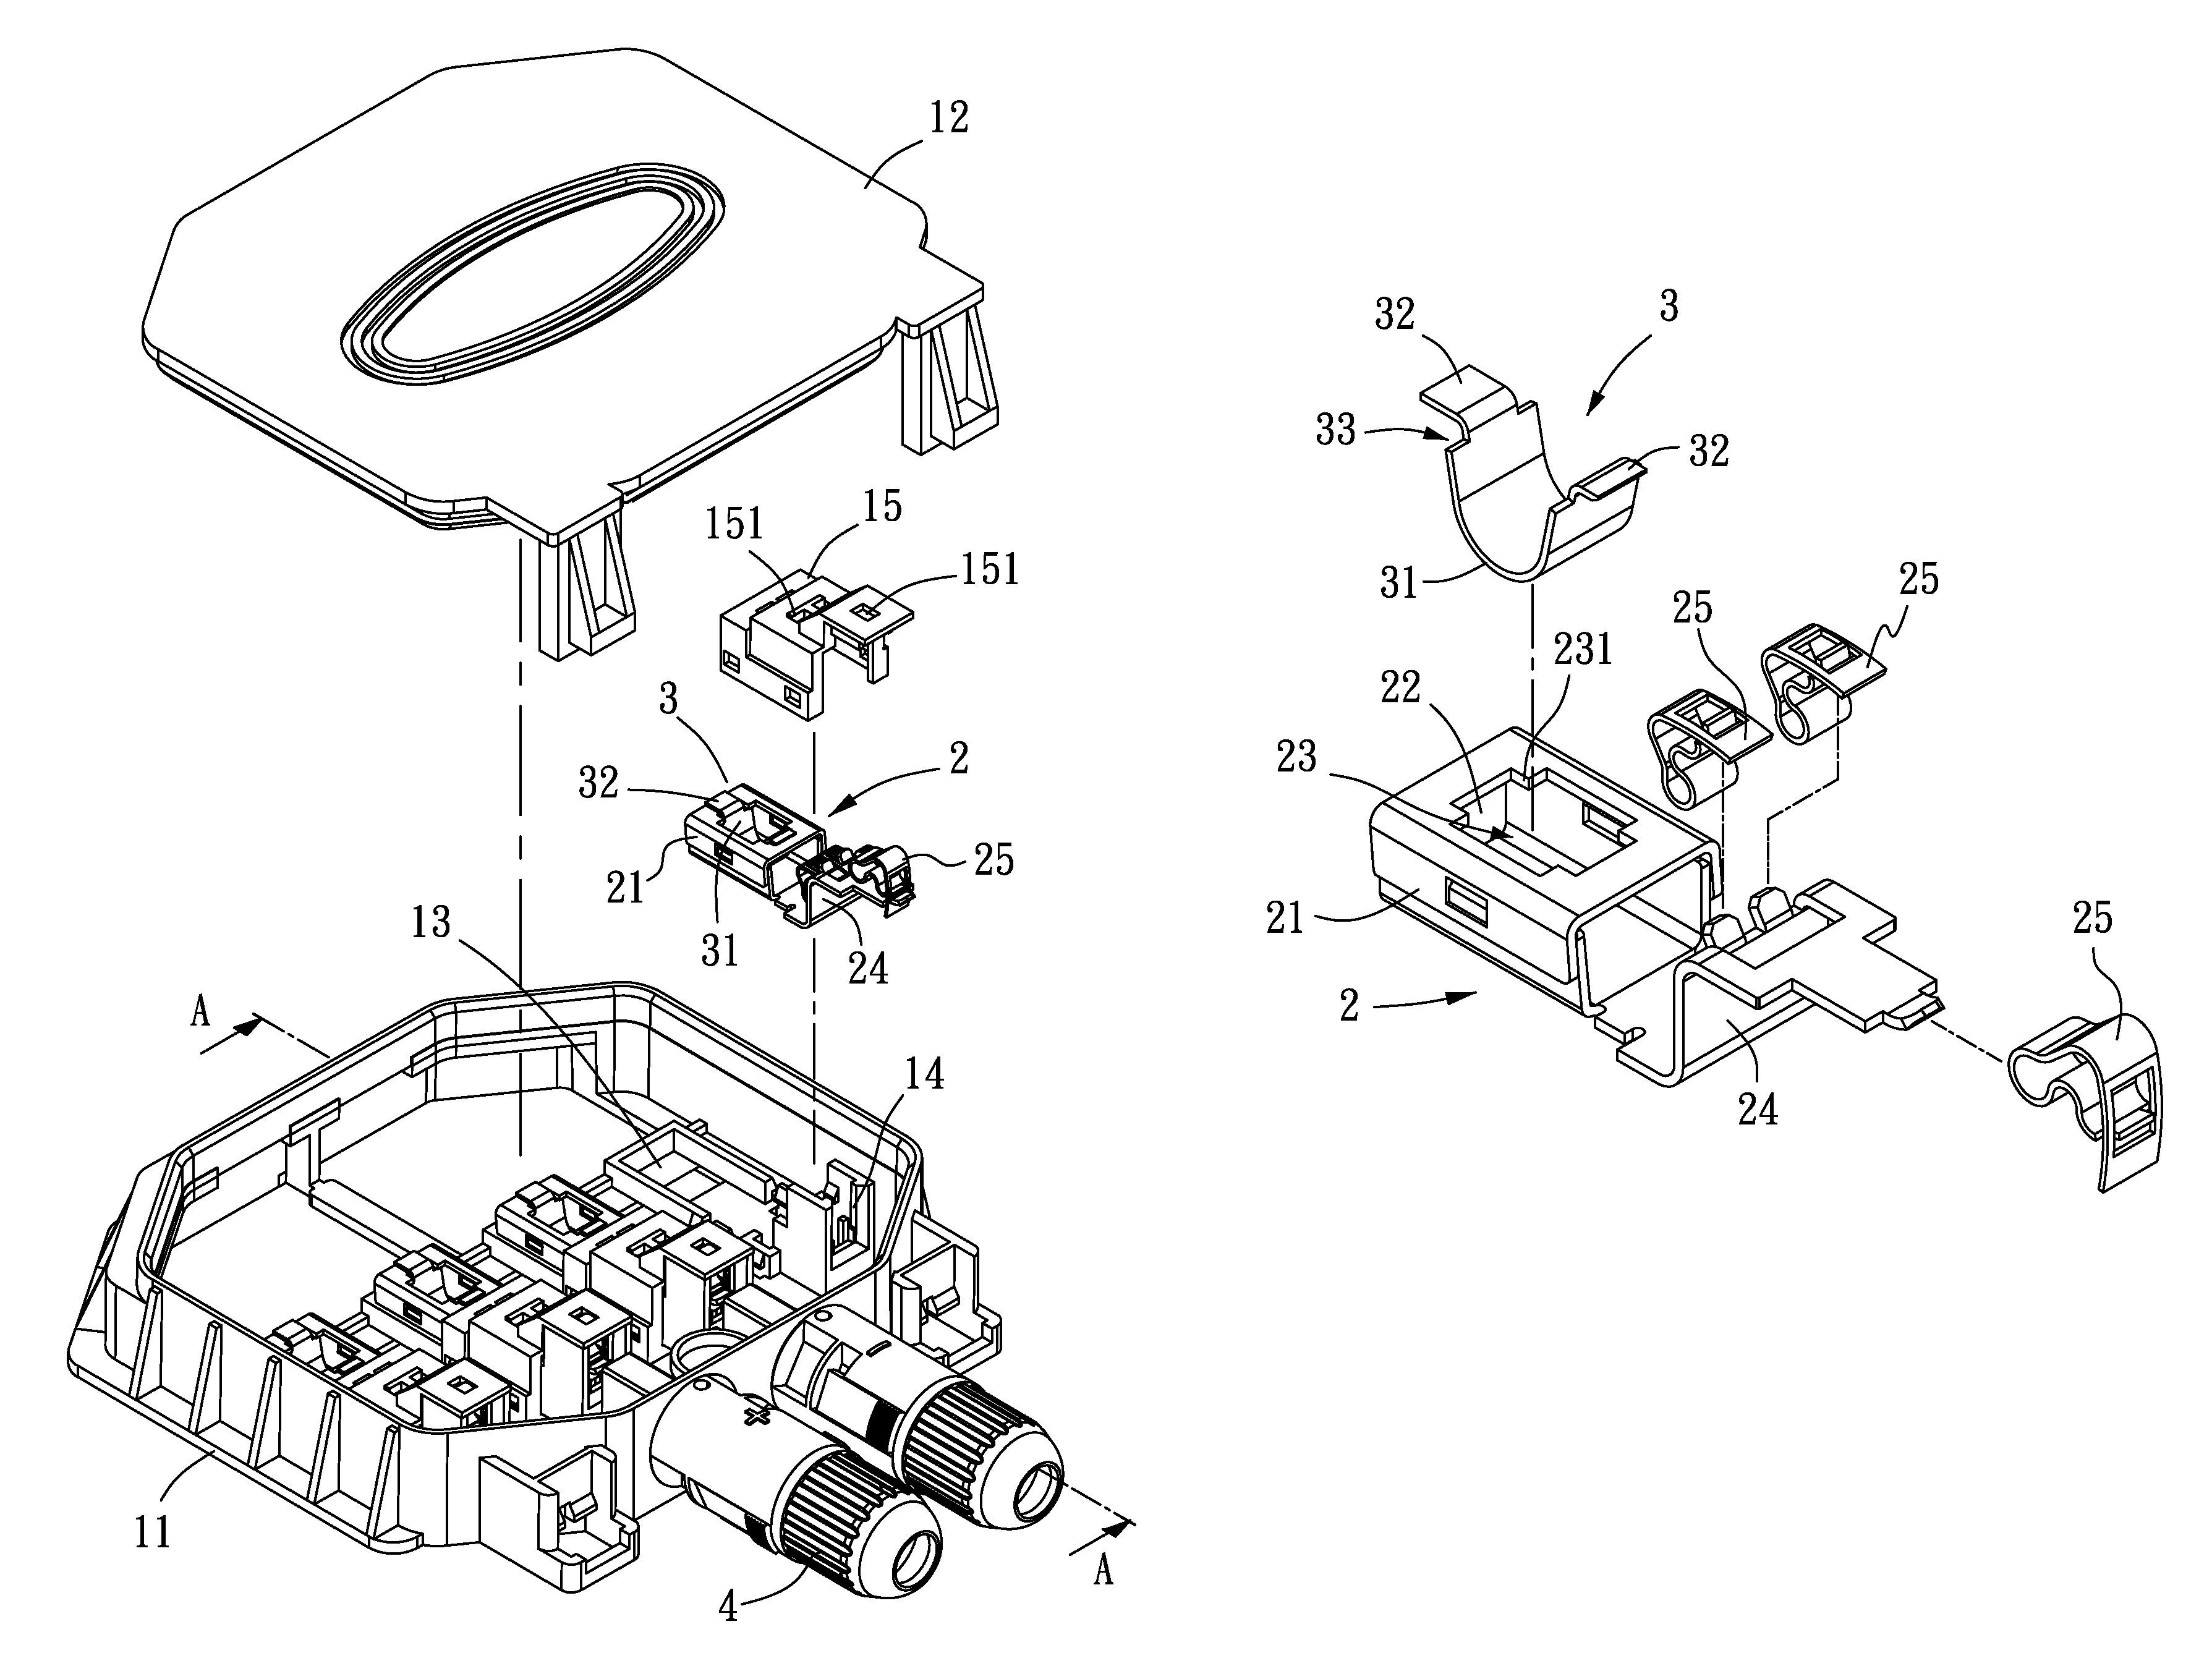 Connecting device for solar panel